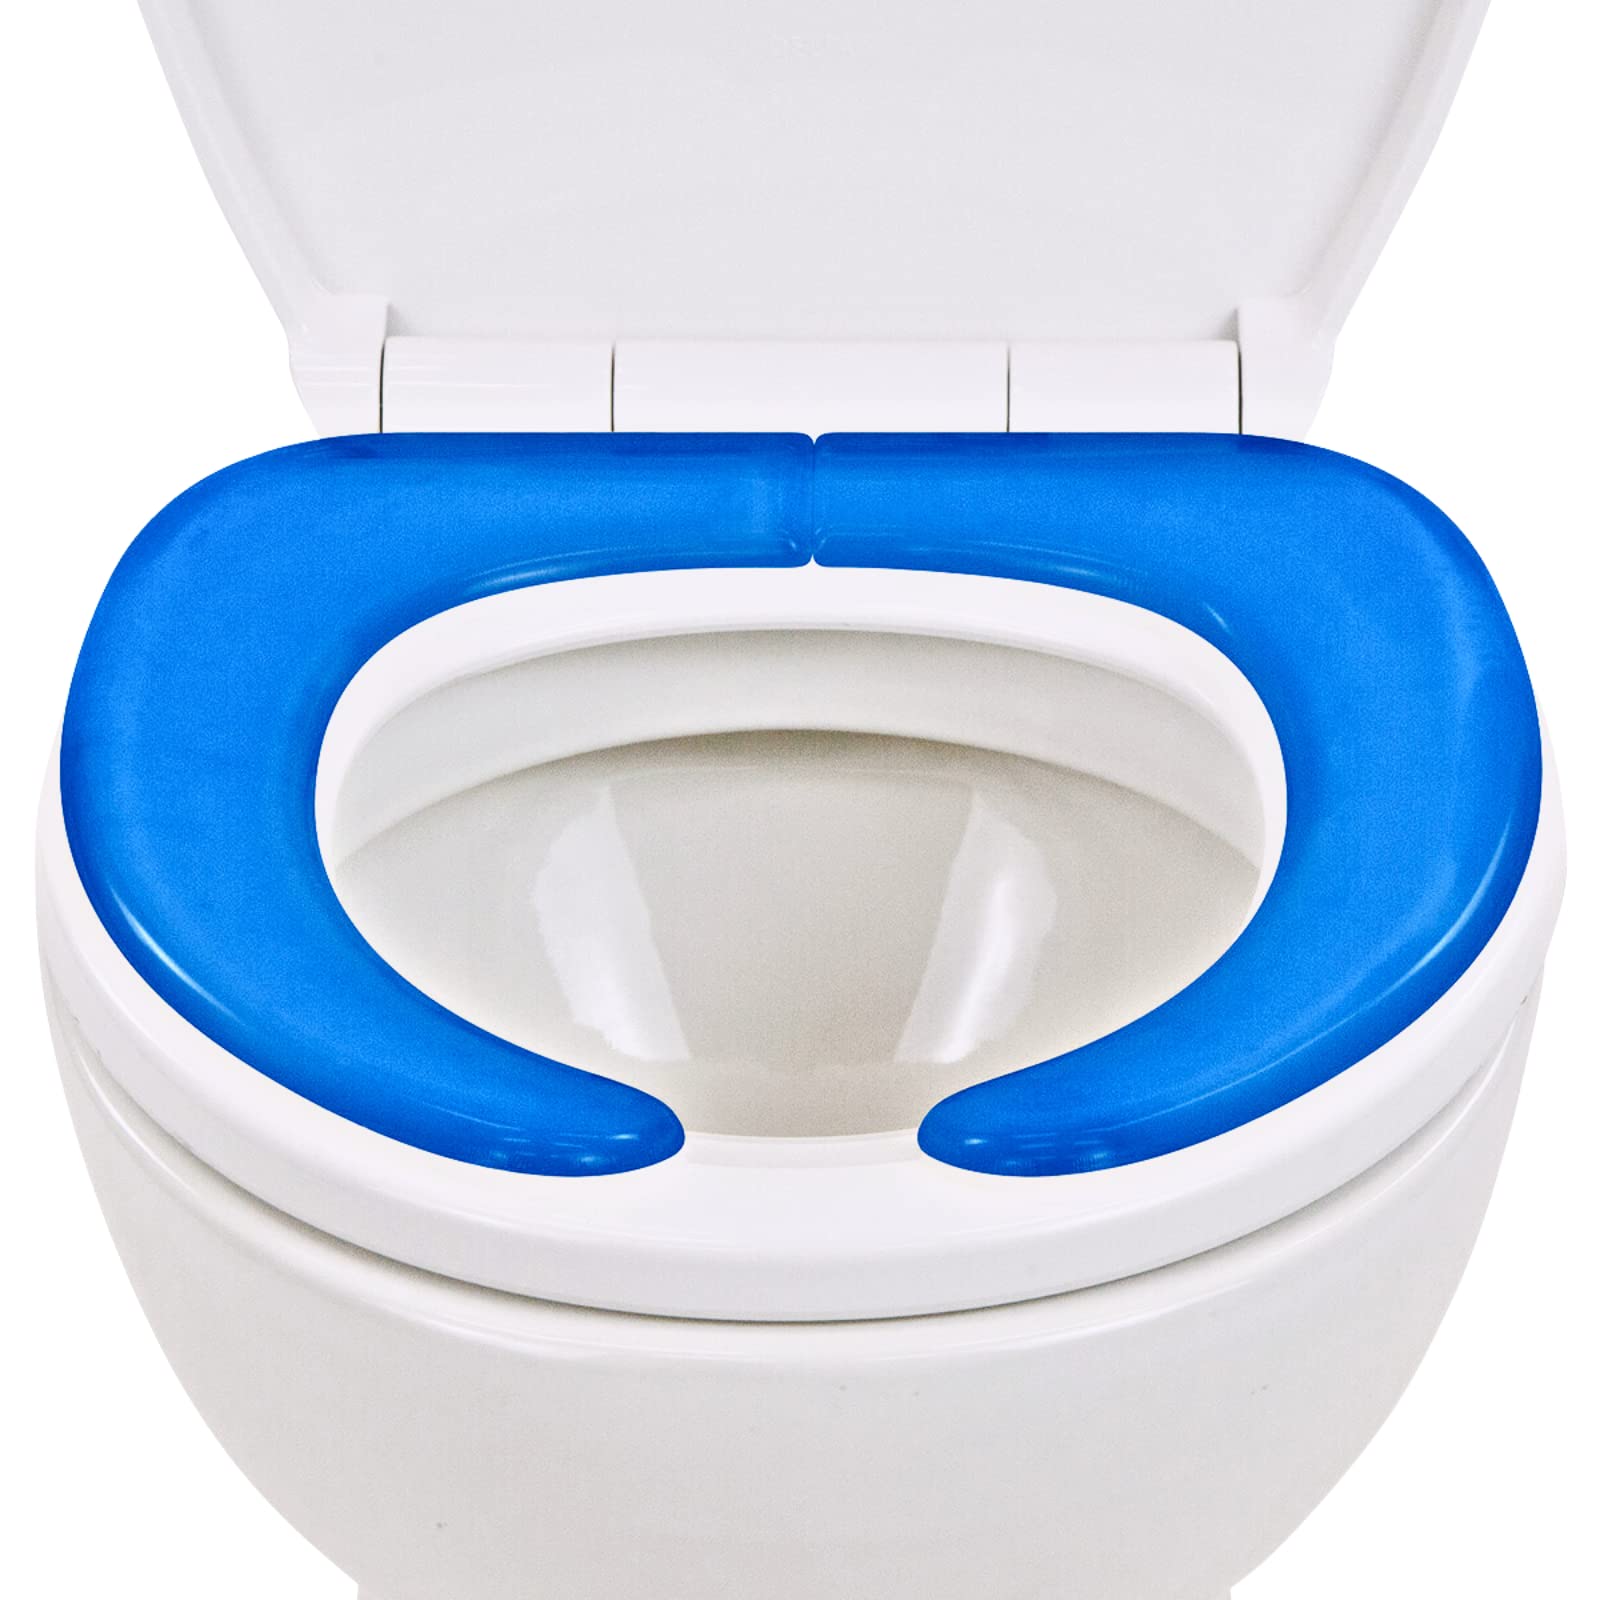 Vive Gel Toilet Seat Cushion Cover - Fits Elongated and Standard Toilet Models - Adhesive Padded Cushions for Pressure Relief (Blue)